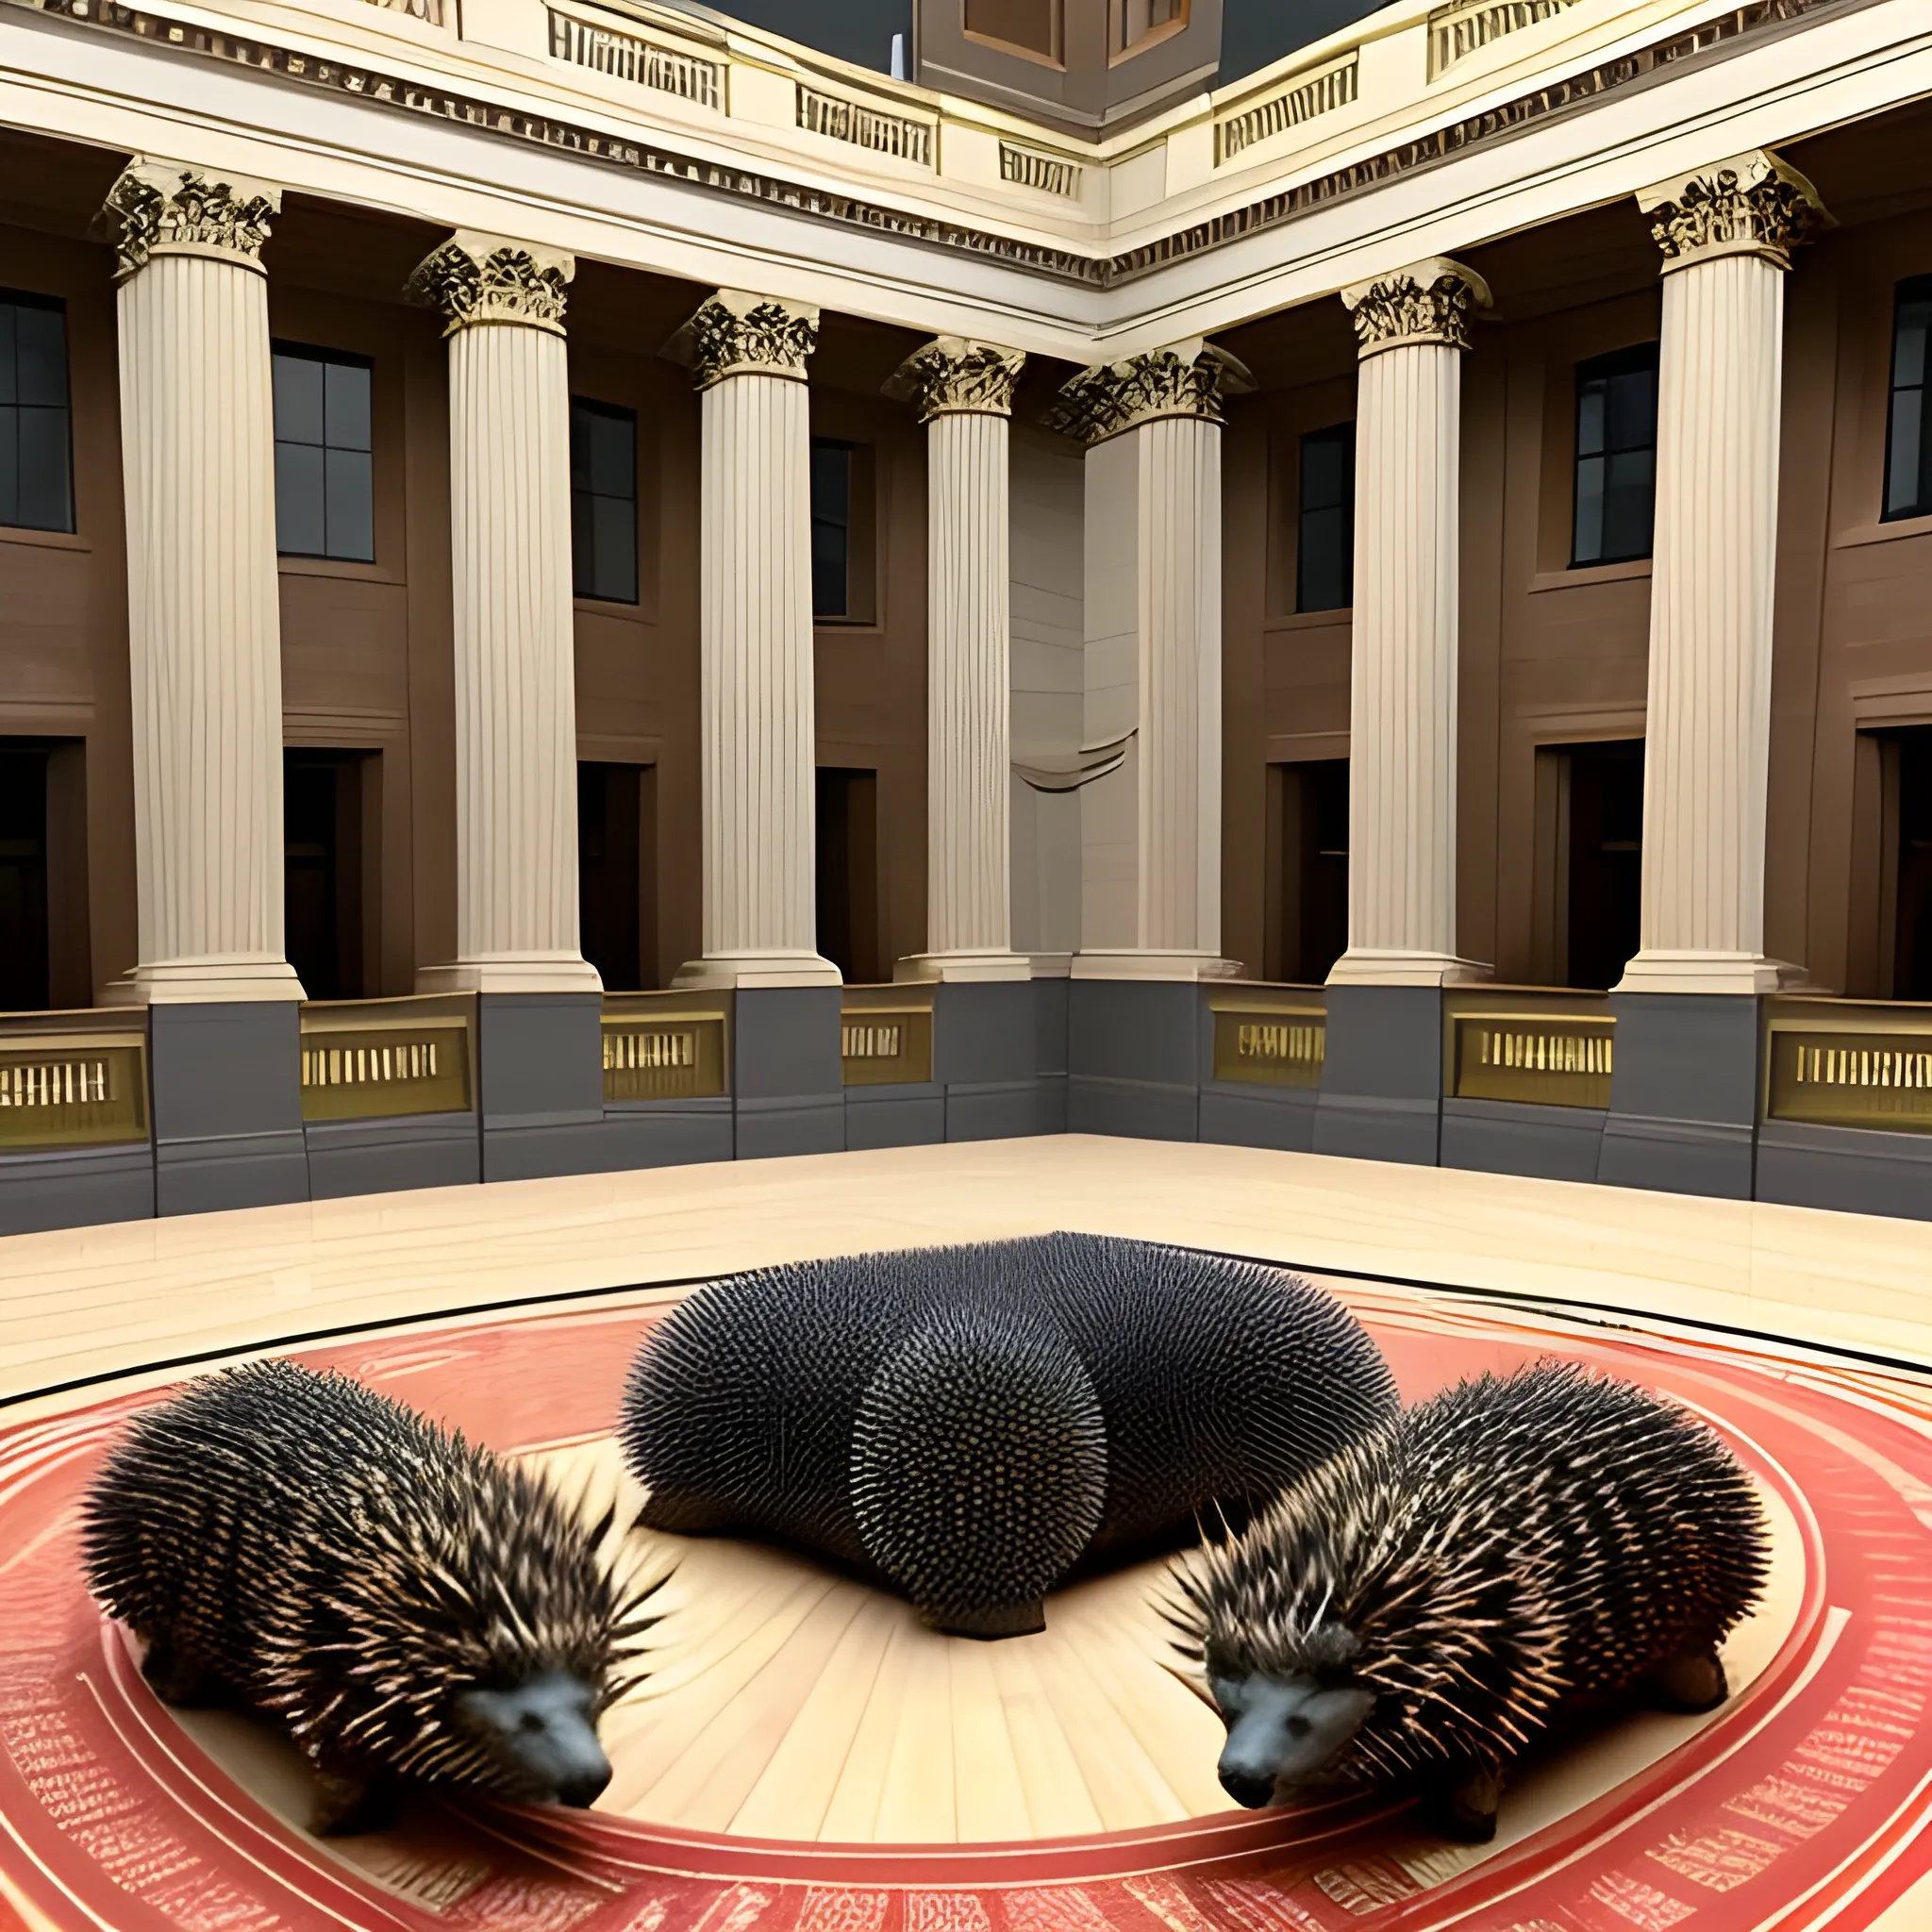 Capitol Building turned into a play space for porcupines and kids, Cartoon